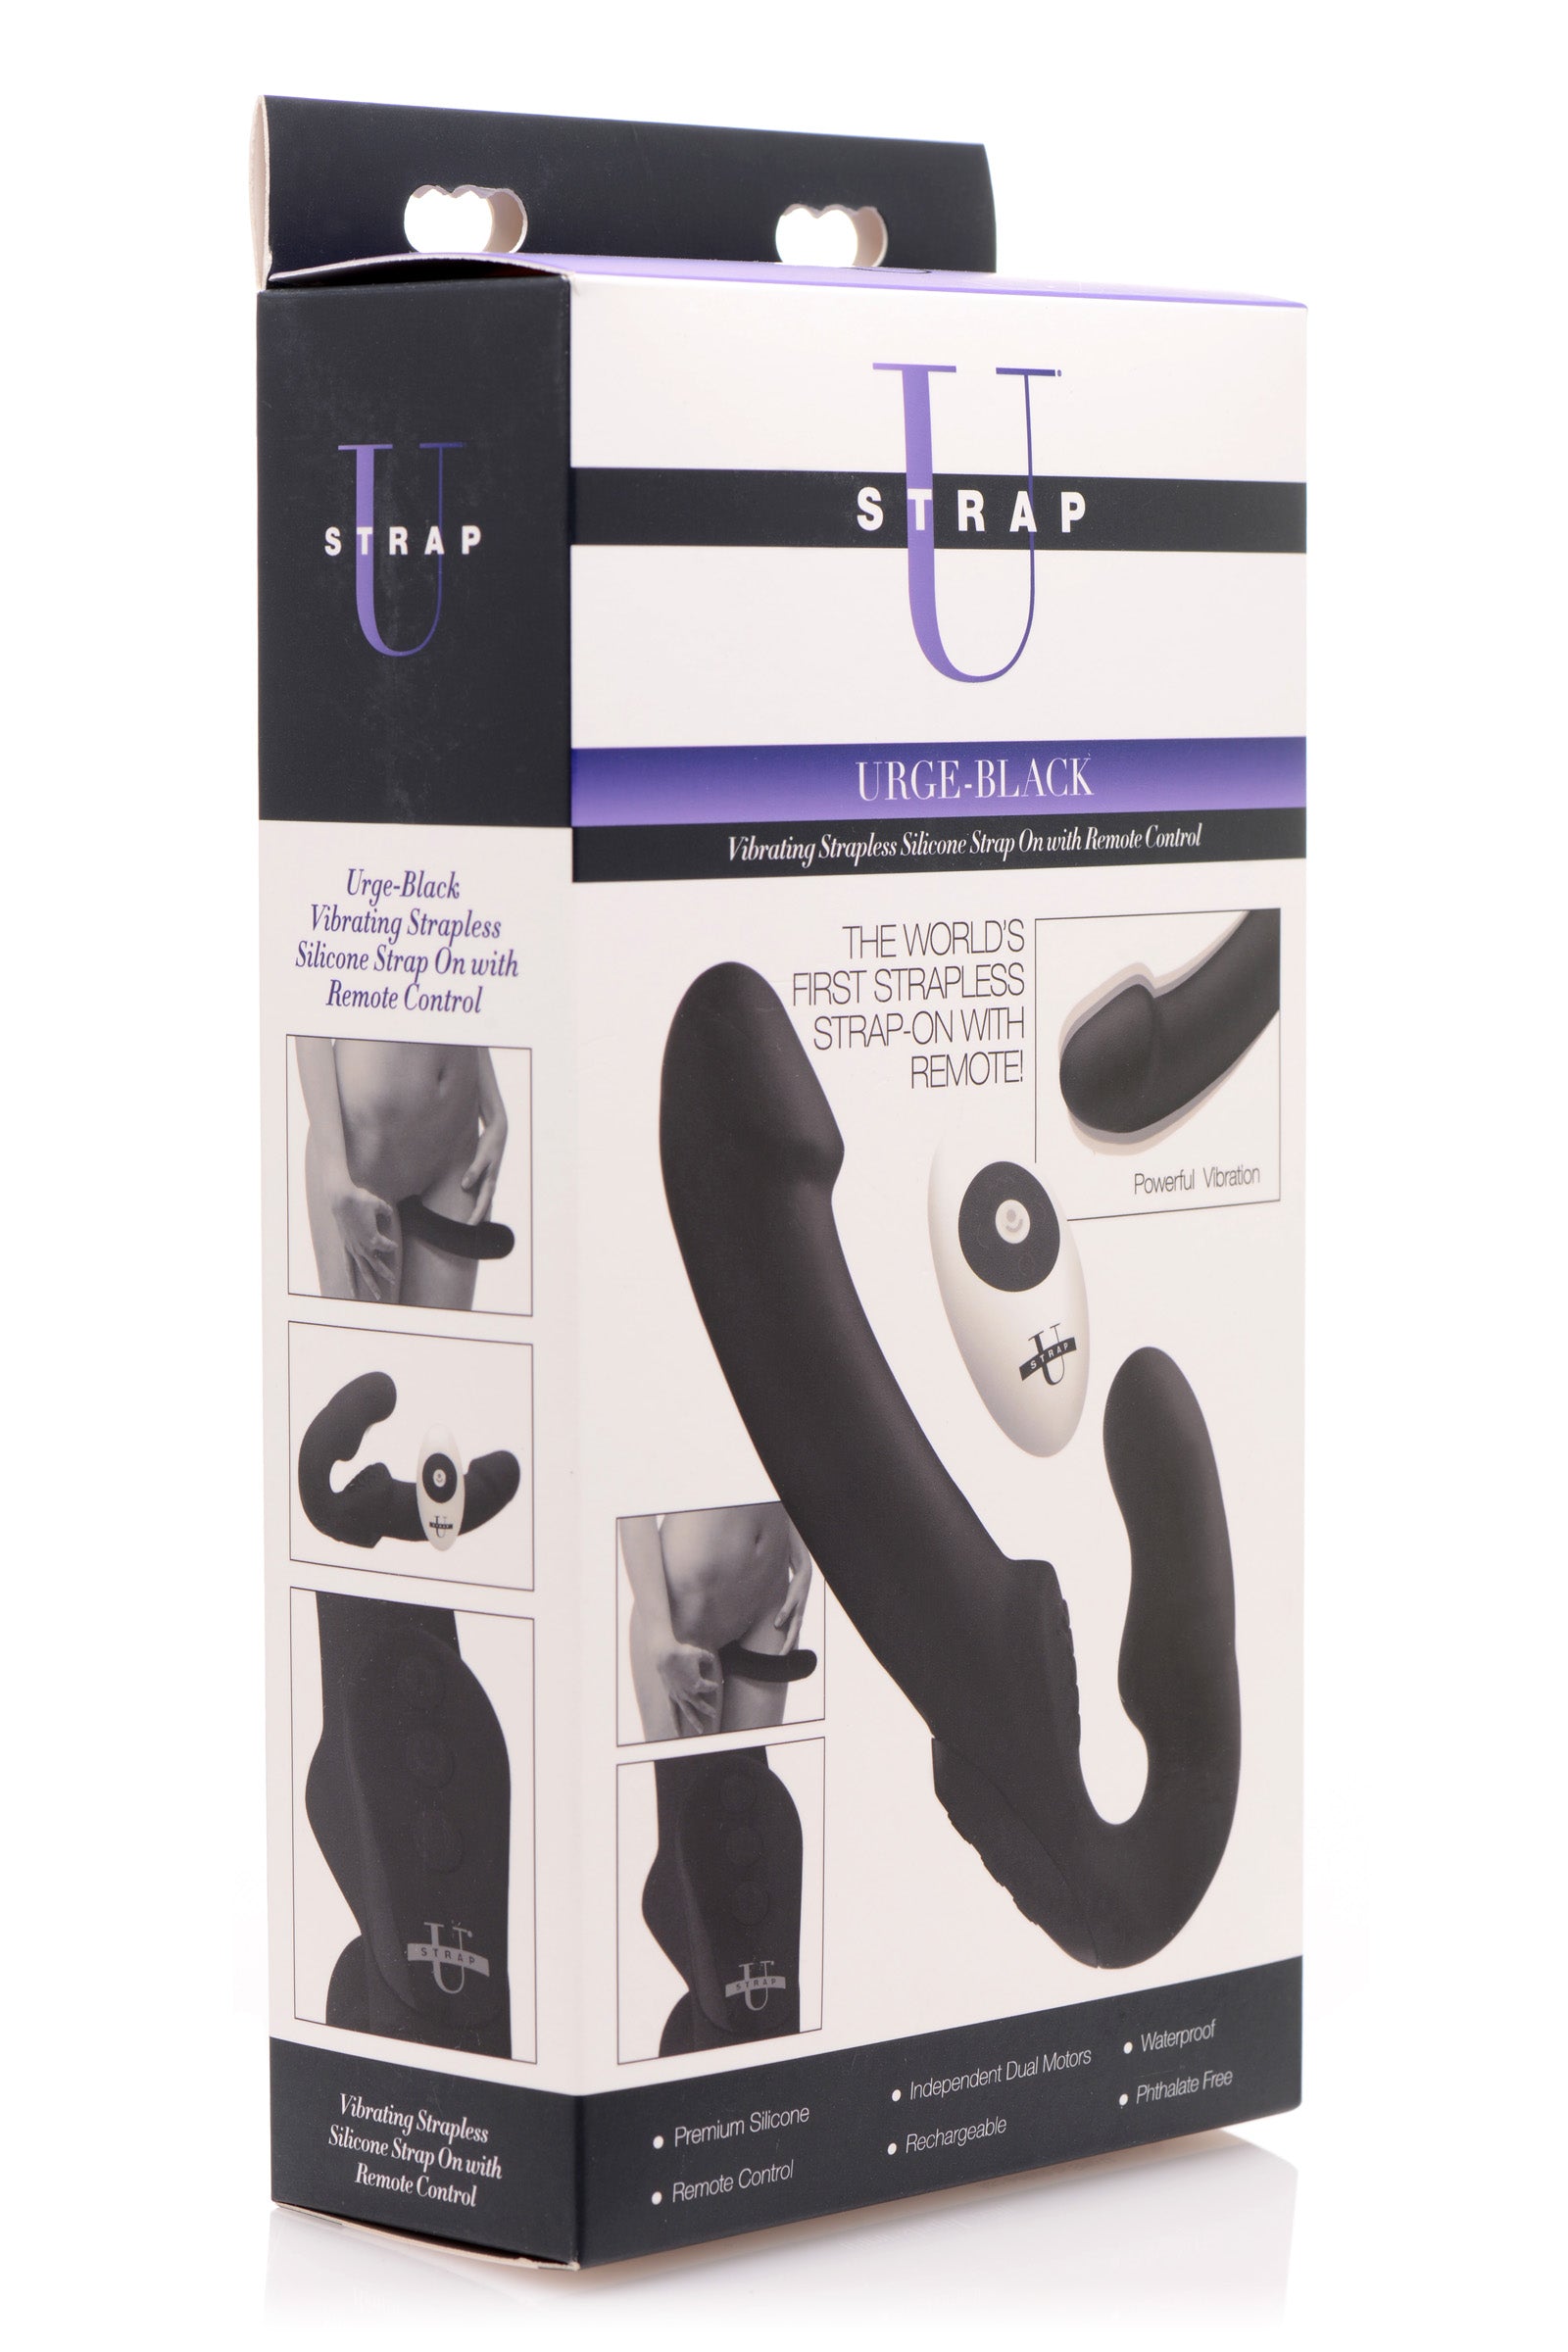 Urge Silicone Strapless Strap On With Remote- Black - UABDSM